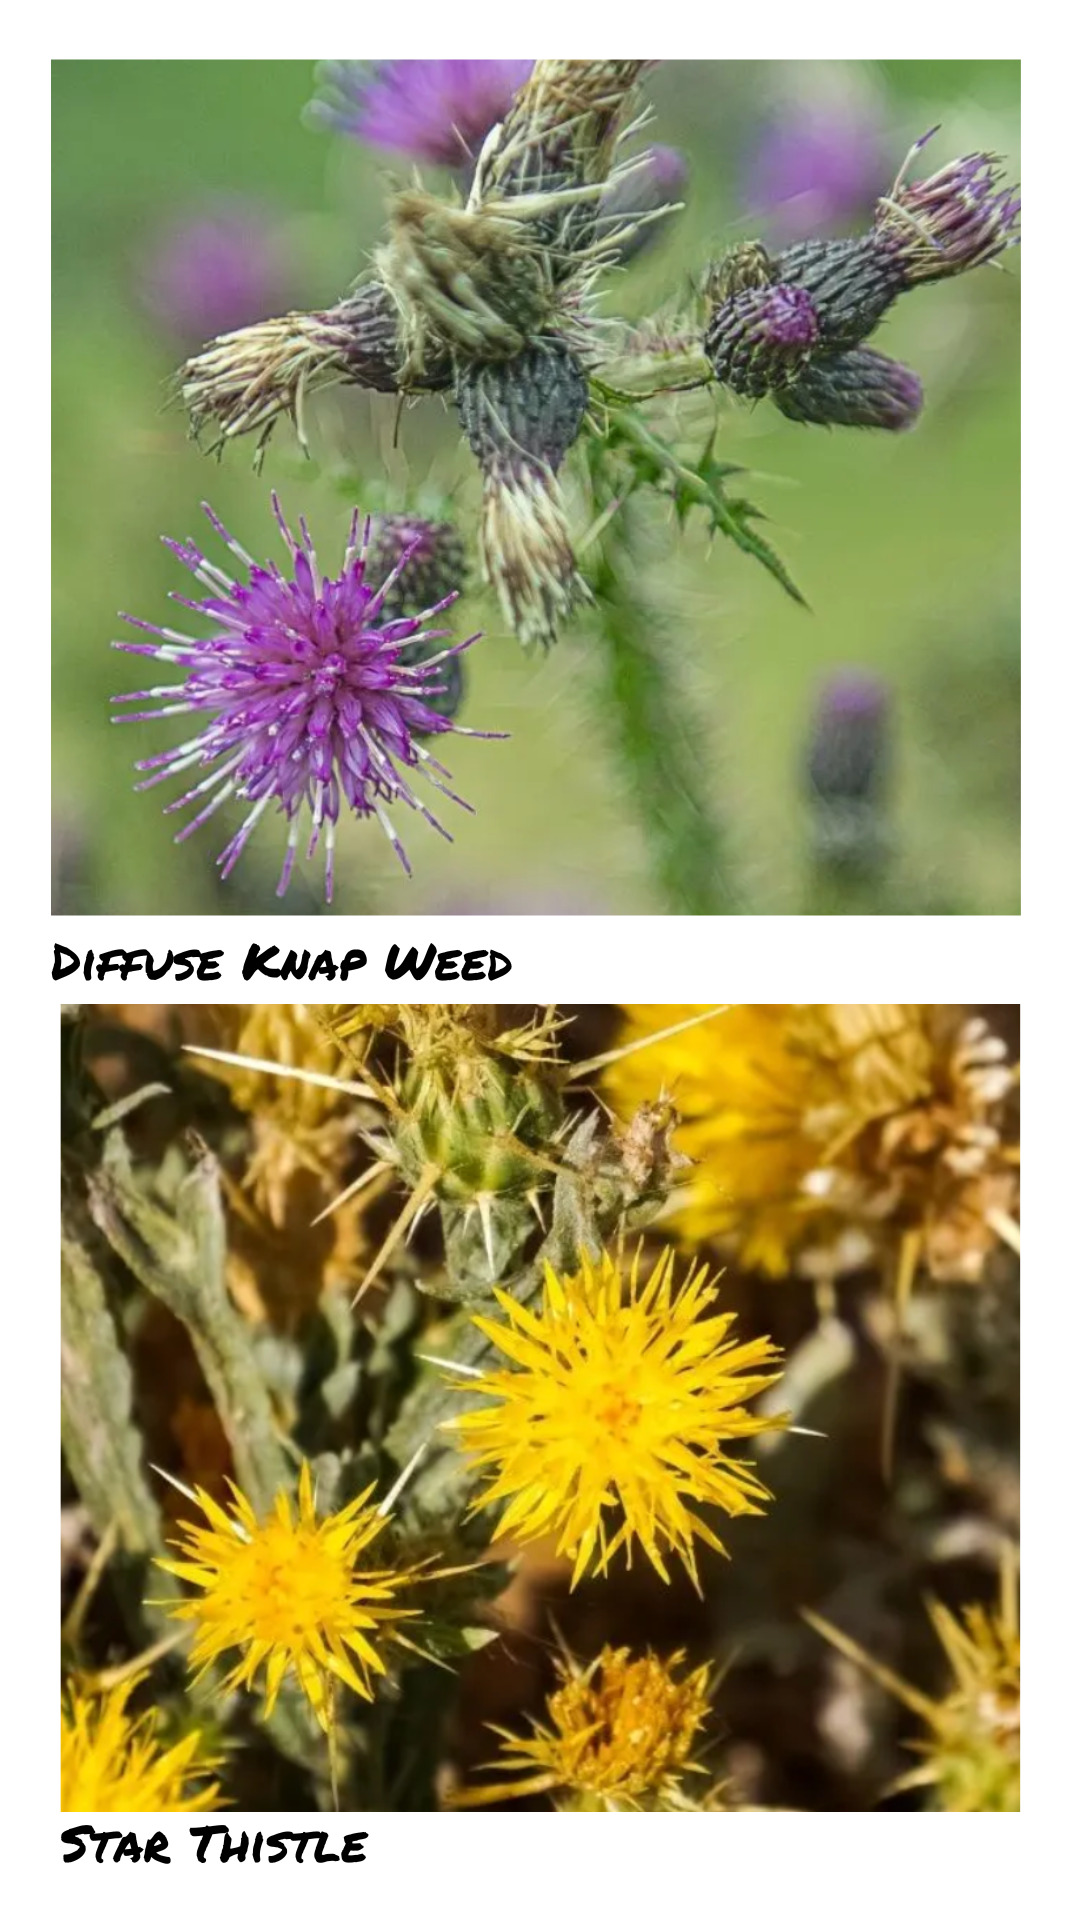 Invasive Weeds include Star thistle and diffuse knap weed.